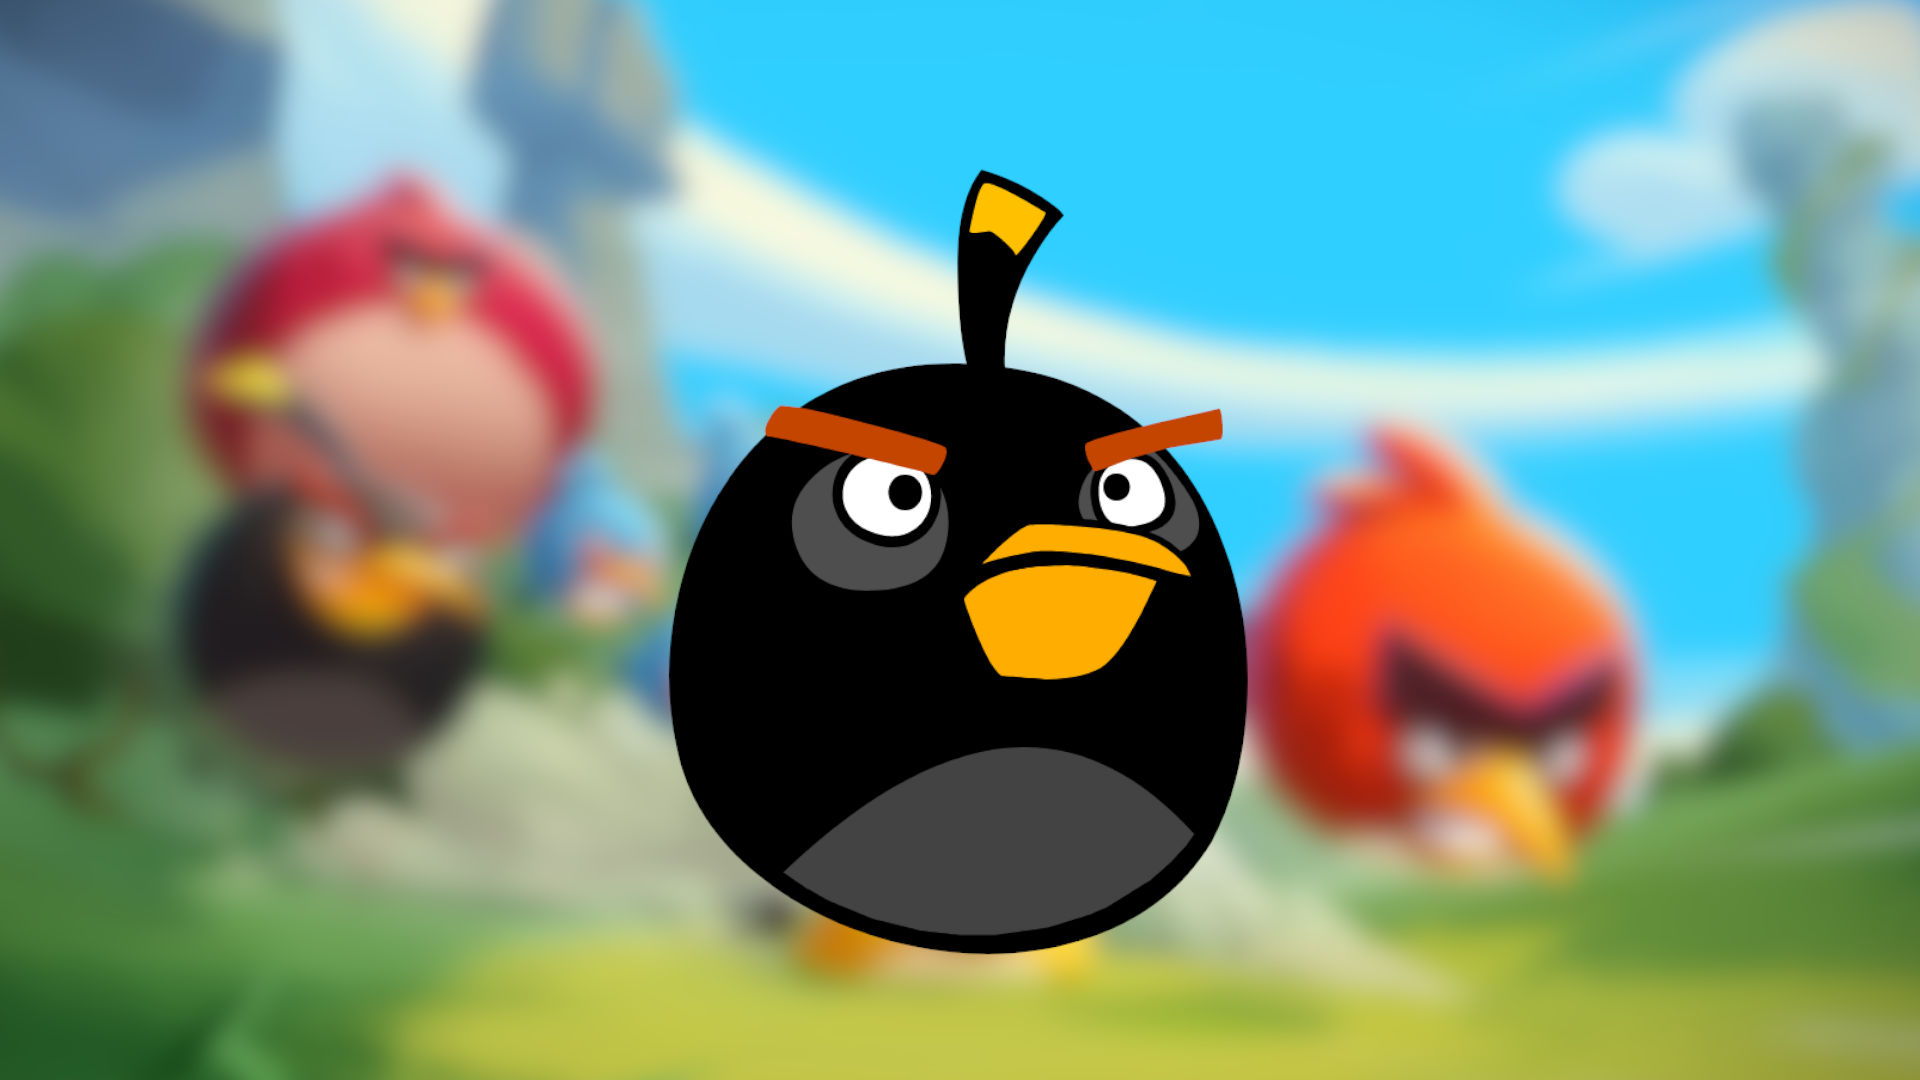 Angry Birds character Bomb